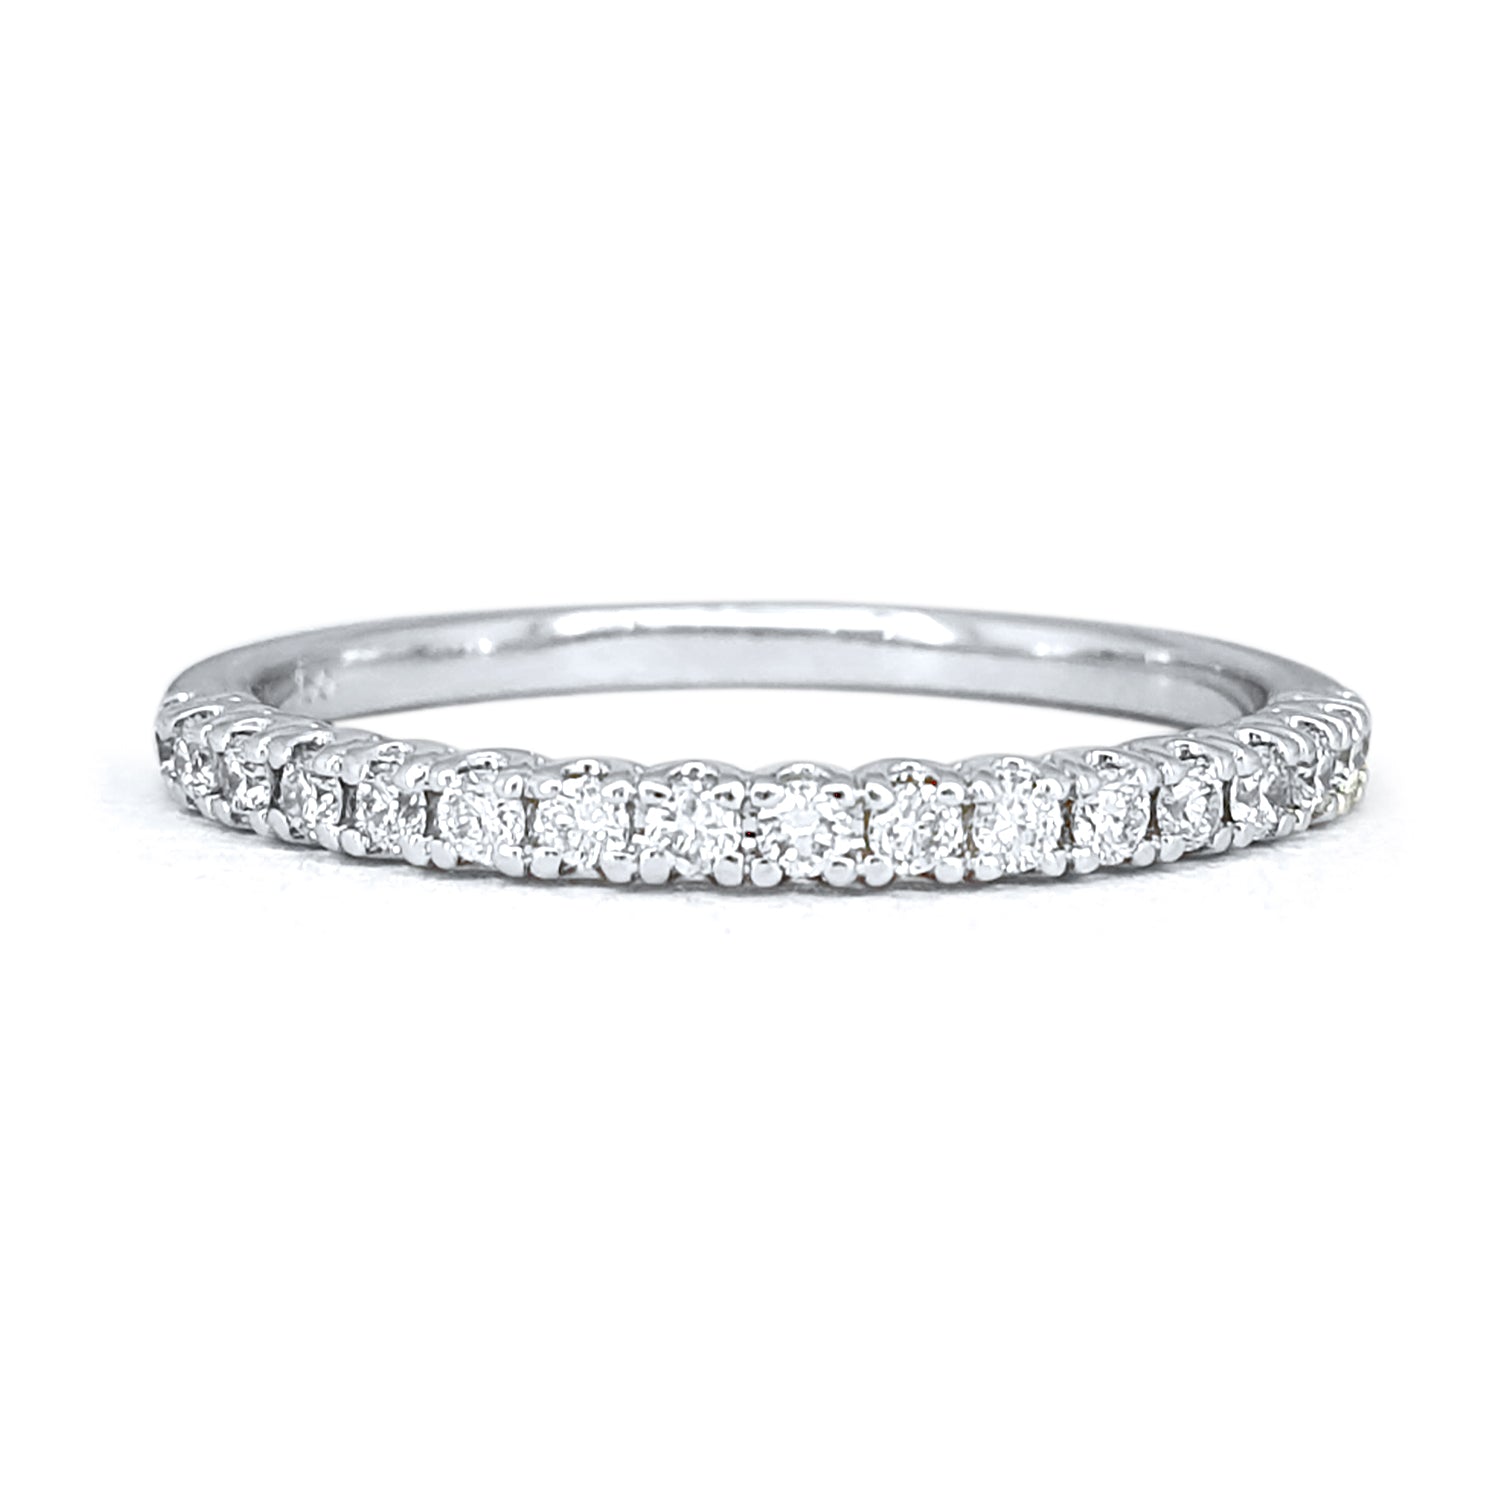 Diamond Eternity Ring | Eternity Ring for Women | Meicel Jewelry Store